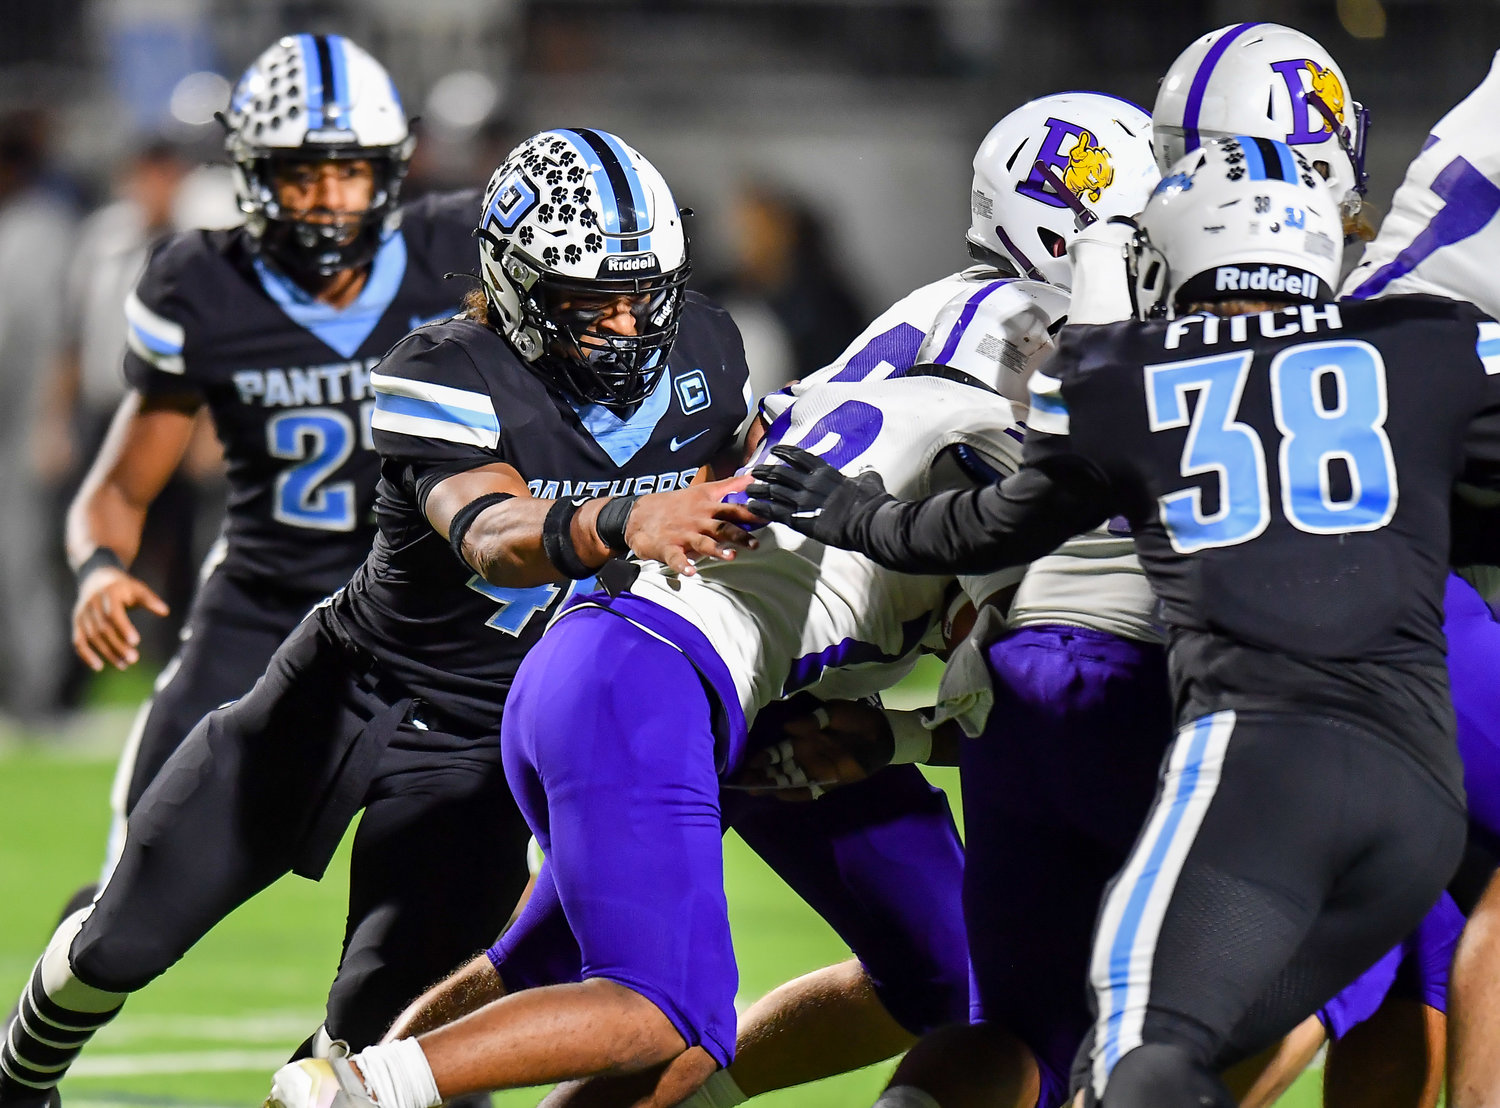 Katy, Tx. Nov 11, 2021: Paetow's Alexander Kilgore #46 makes the stop on a Galveston Ball runner during a playoff game between Paetow and Galveston Ball at Legacy Stadium in Katy. (Photo by Mark Goodman / Katy Times)